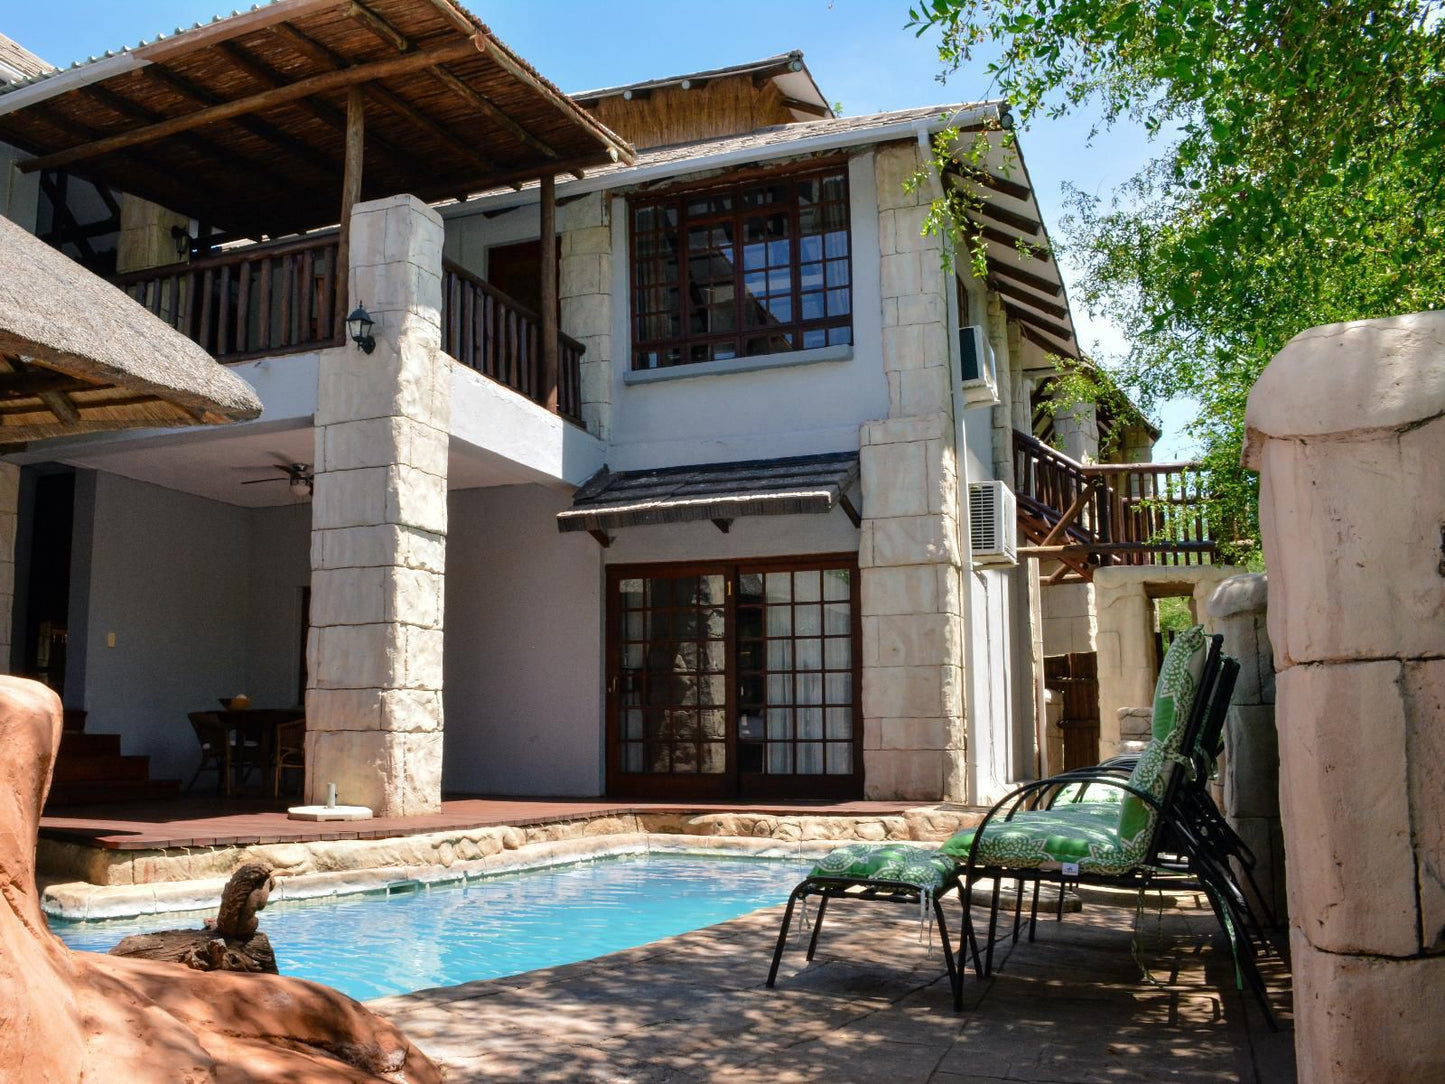 Beyond The Boma Marloth Park Mpumalanga South Africa House, Building, Architecture, Swimming Pool